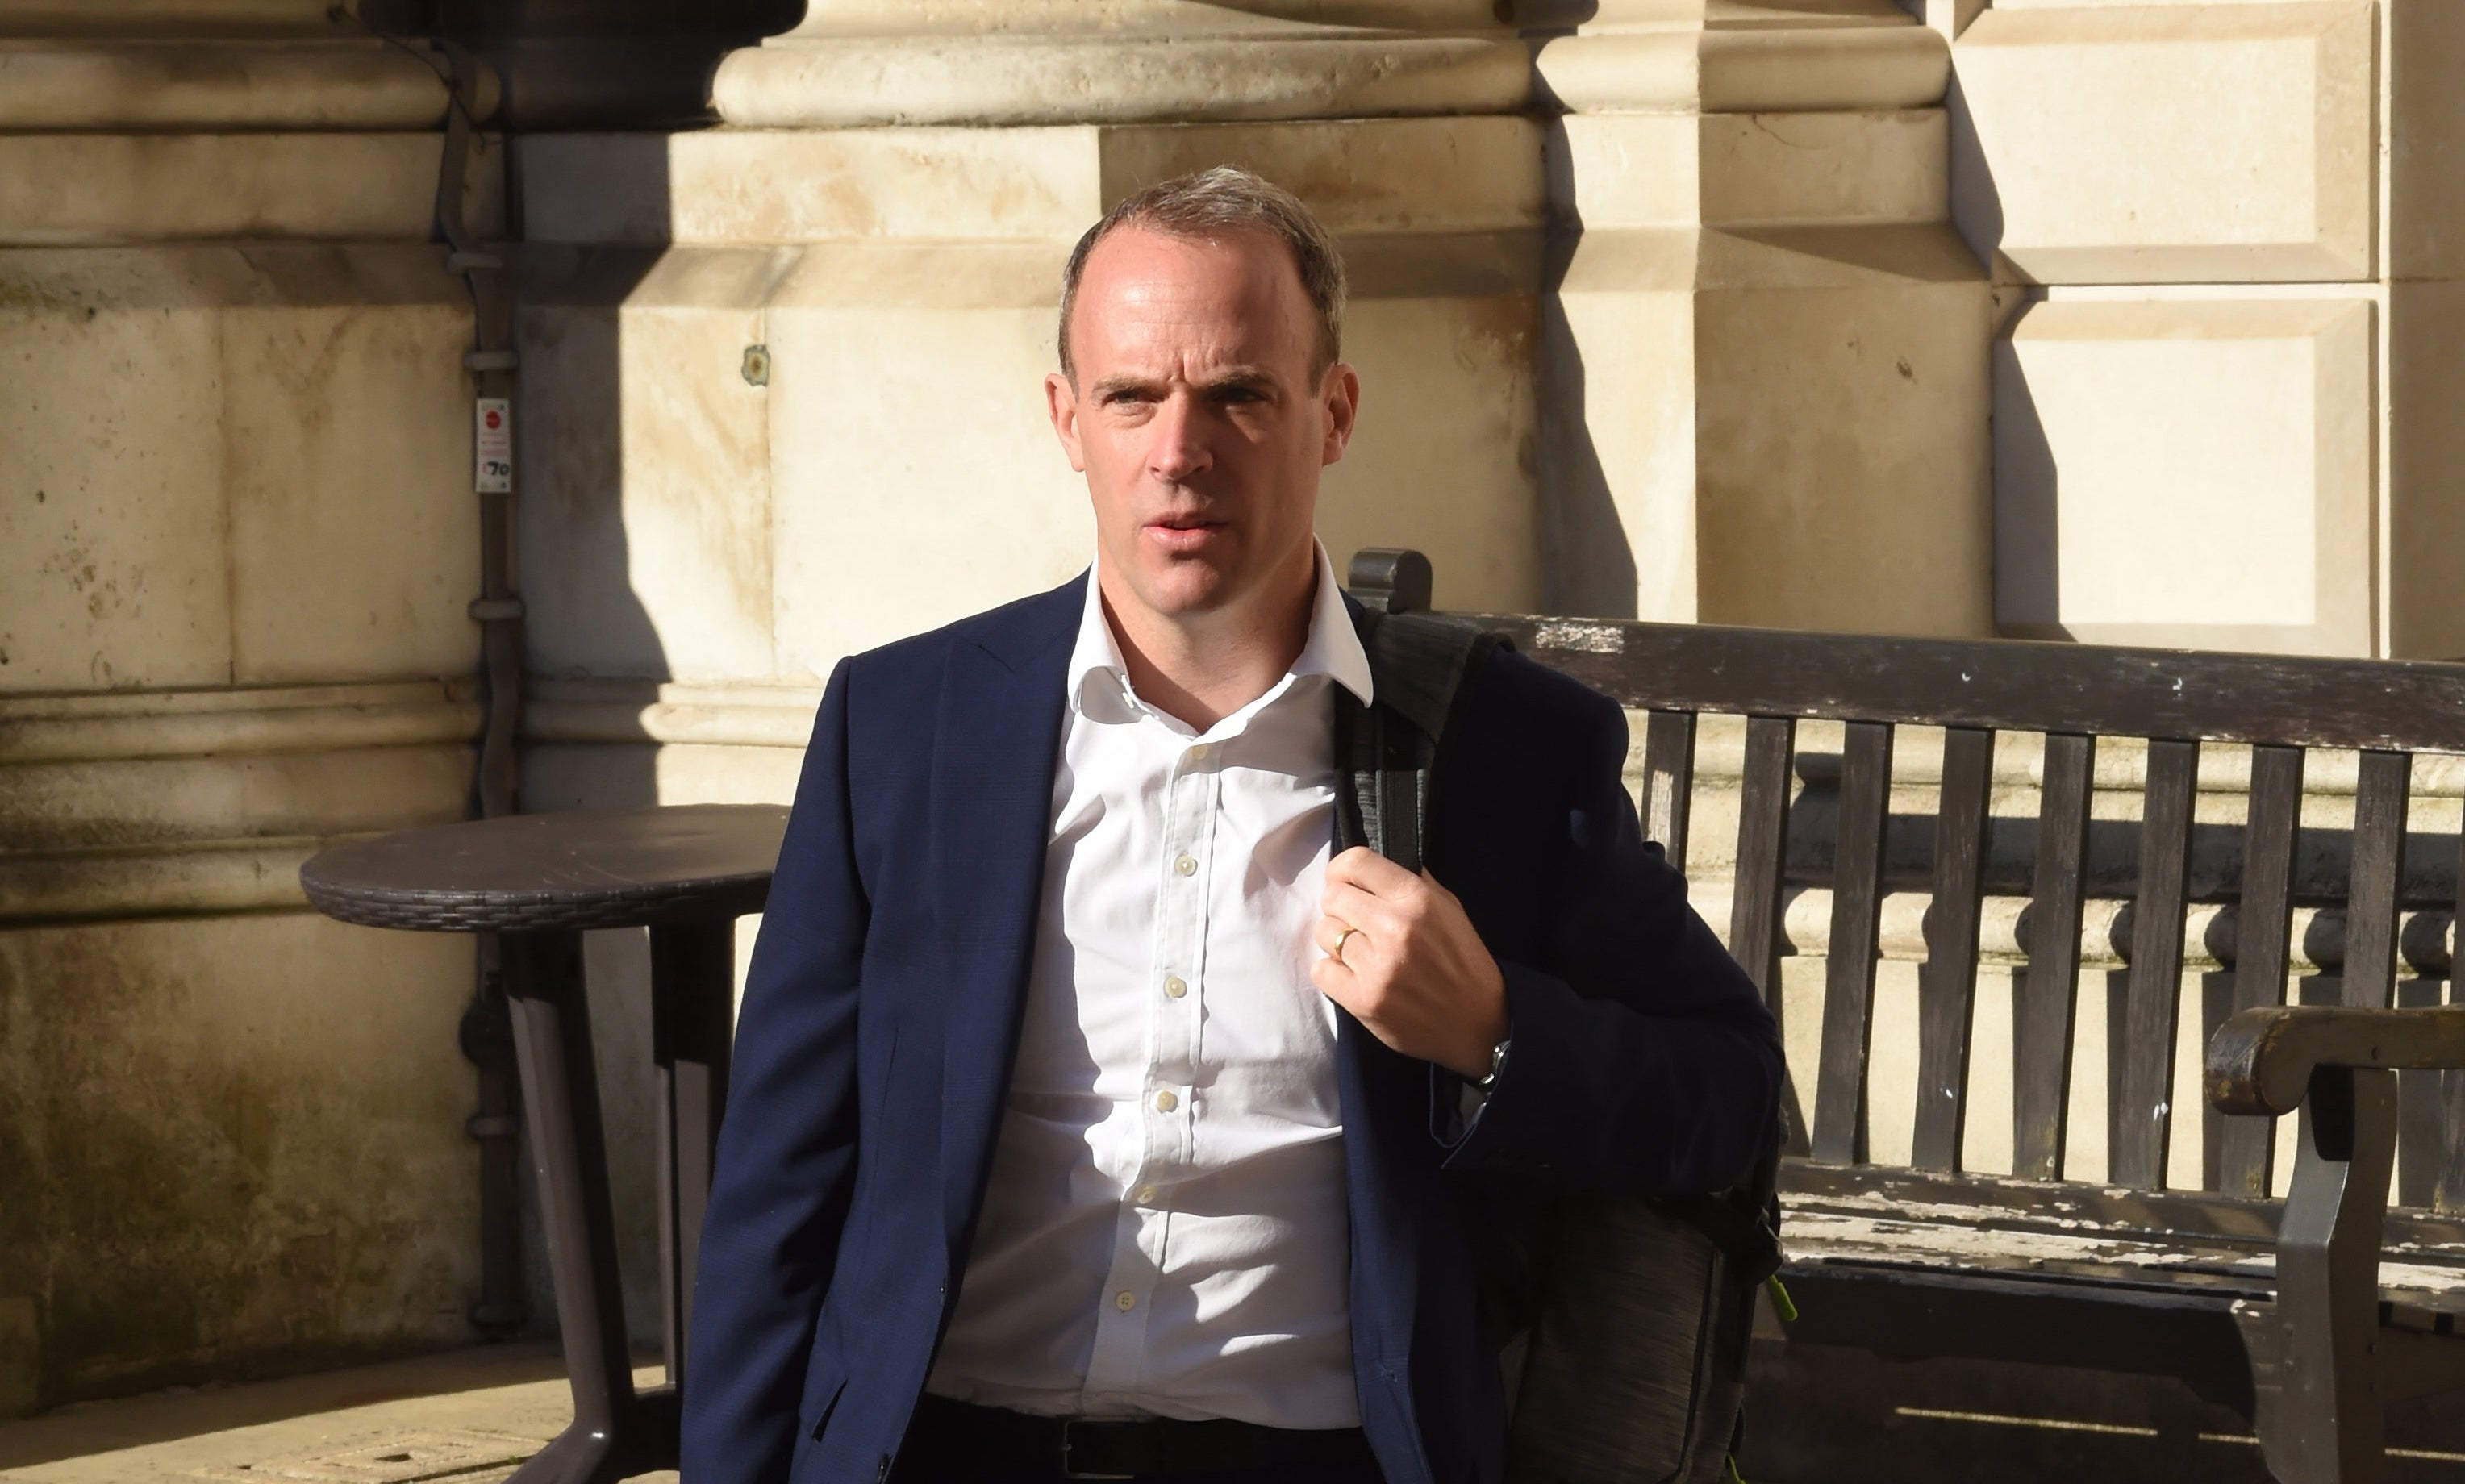 ‘With hindsight, of course, I would have wanted to be back earlier’: Raab was on holiday as chaos unfolded in Afghanistan